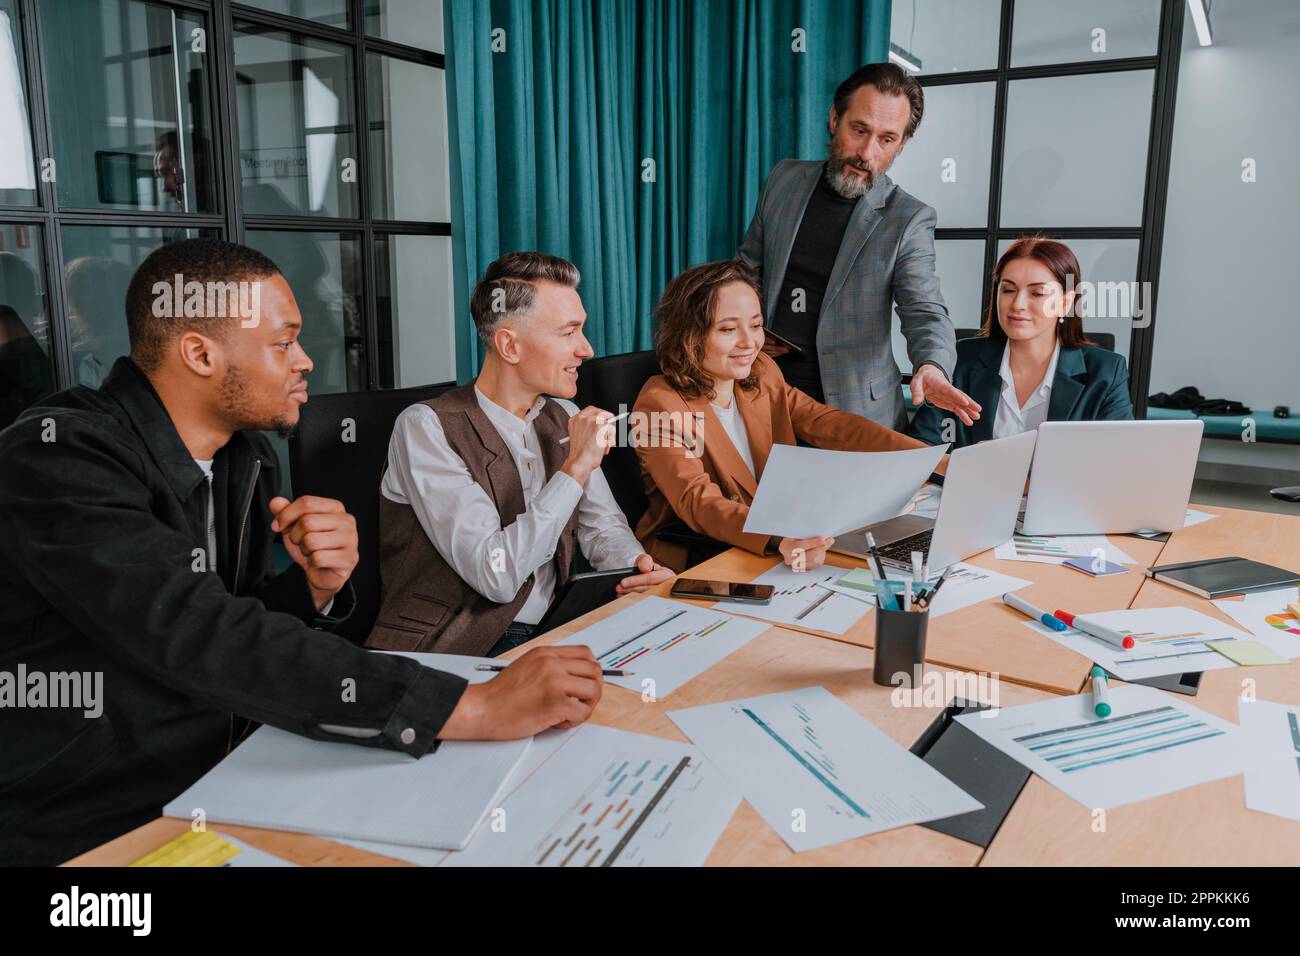 Business people in office connected on internet network analyzing statistics Stock Photo